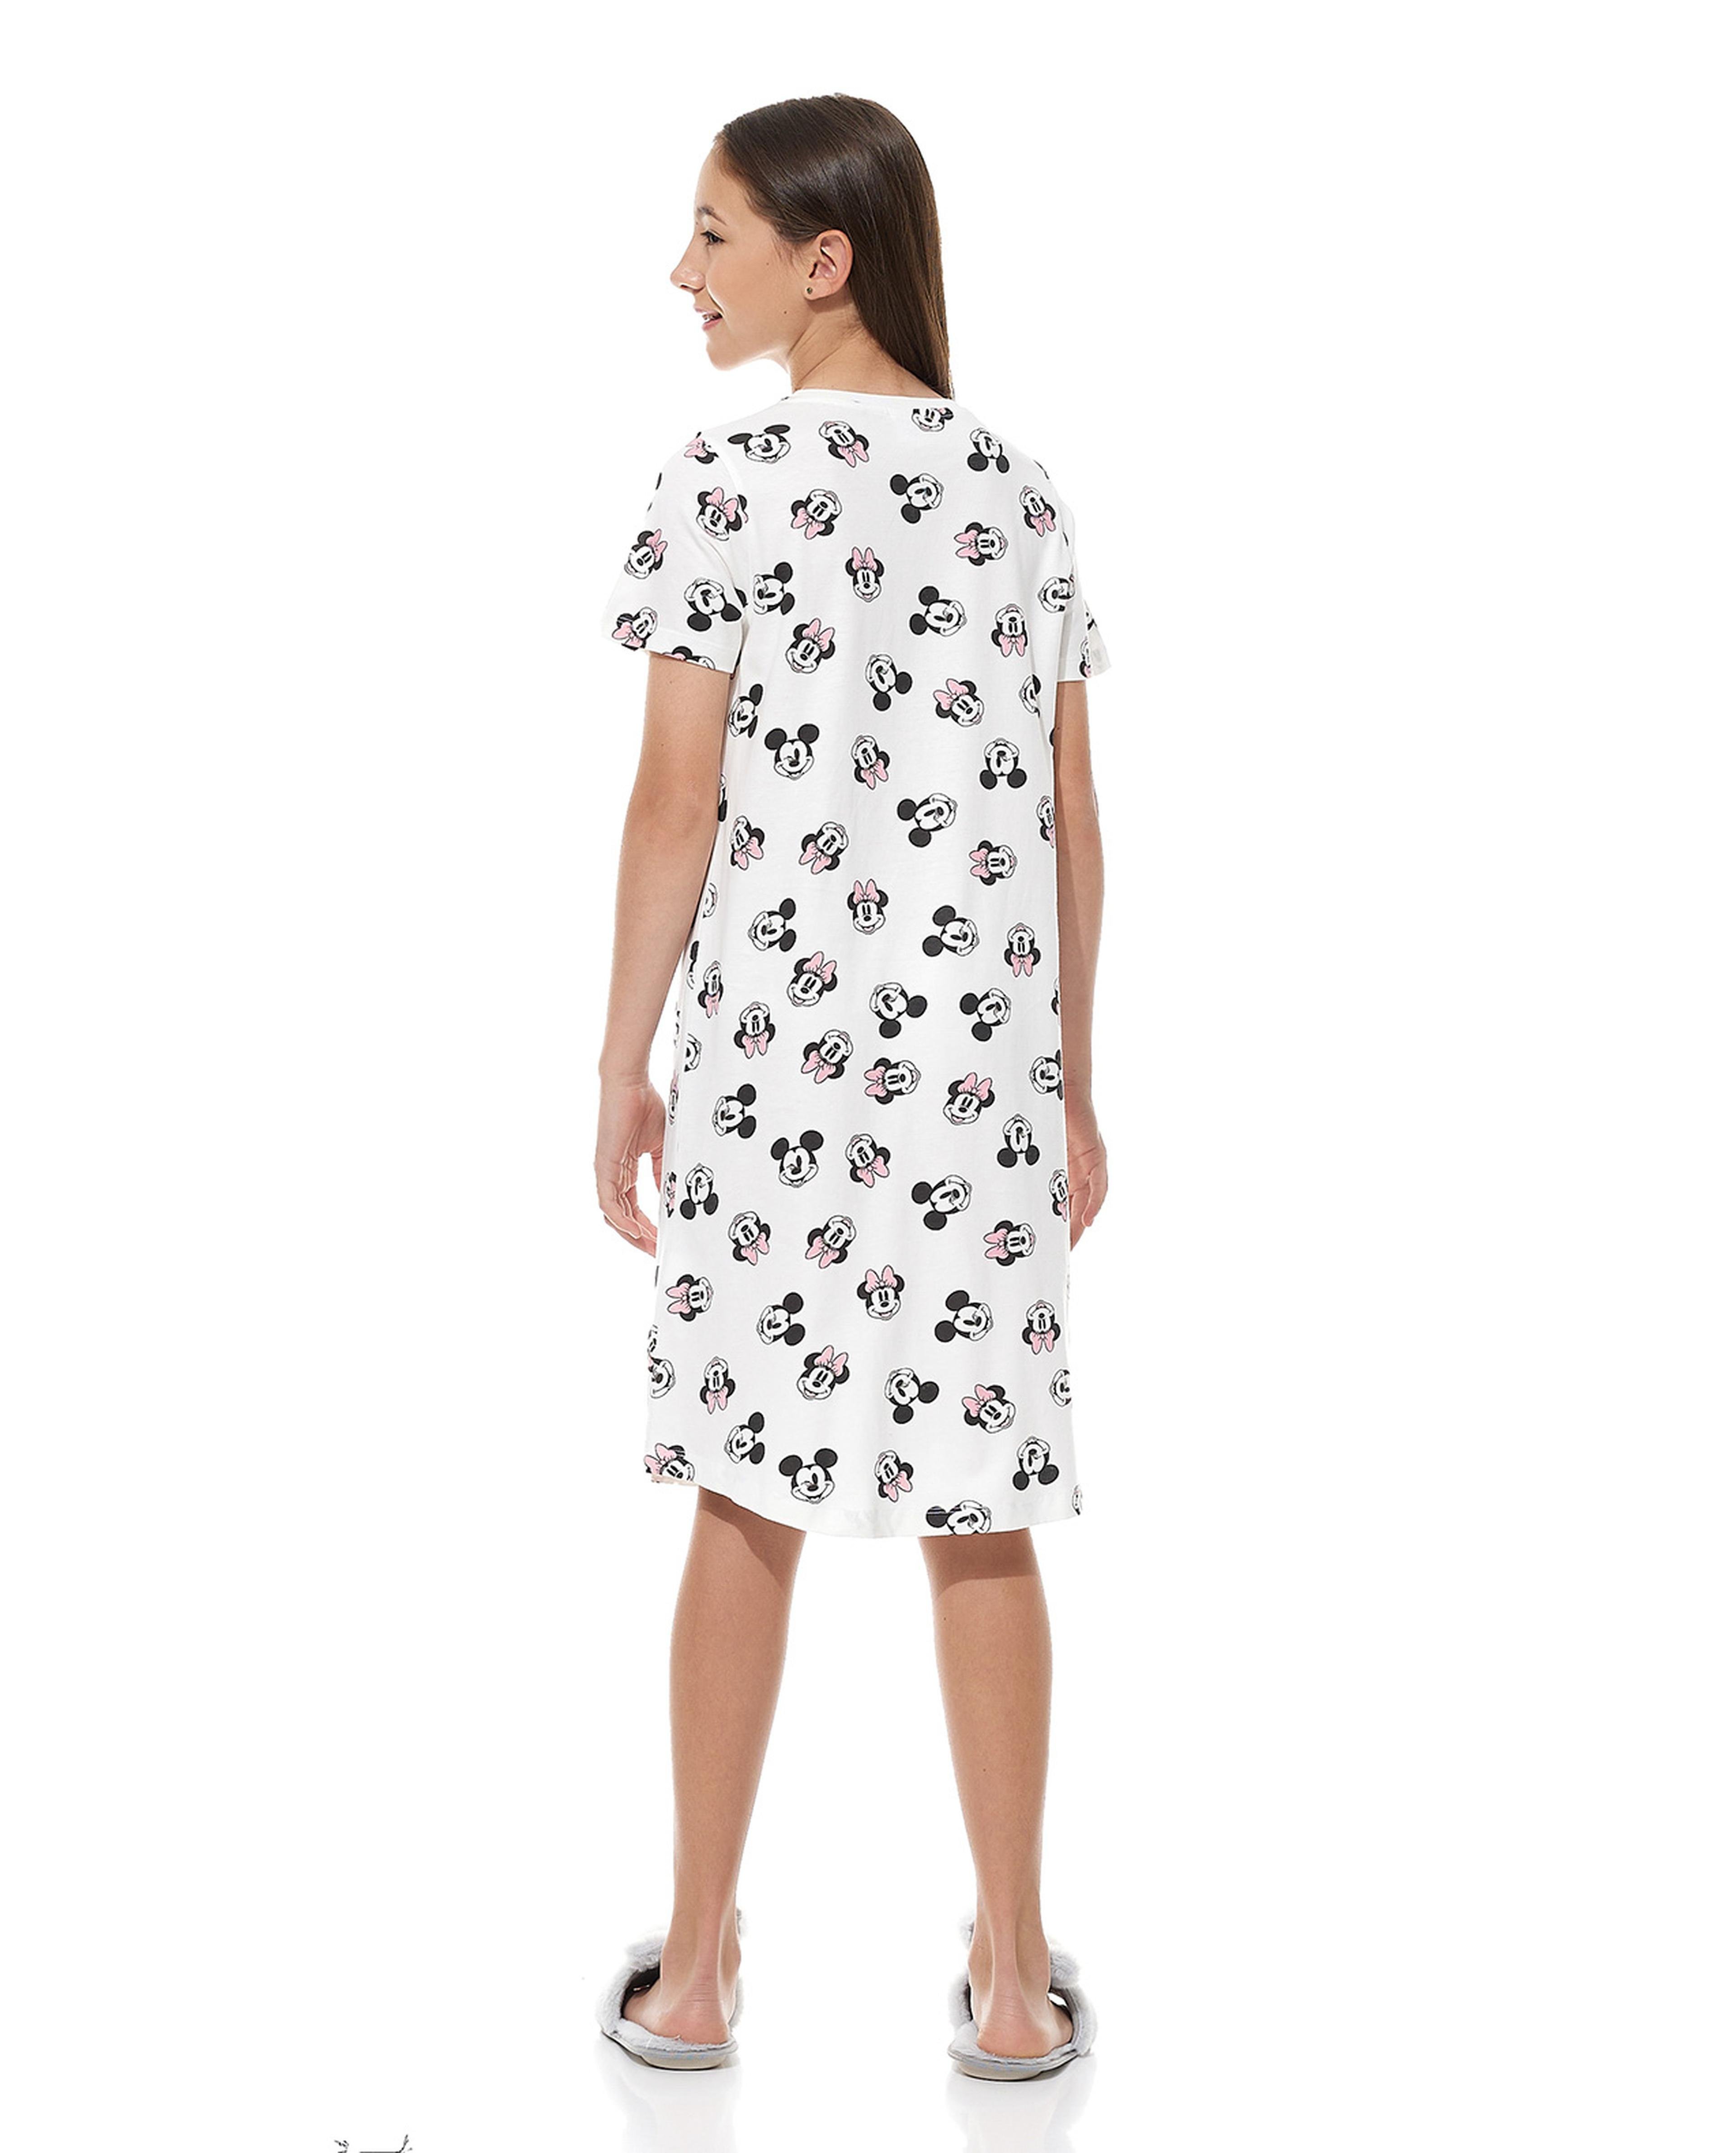 Minnie Mouse Nightdress with Short Sleeves